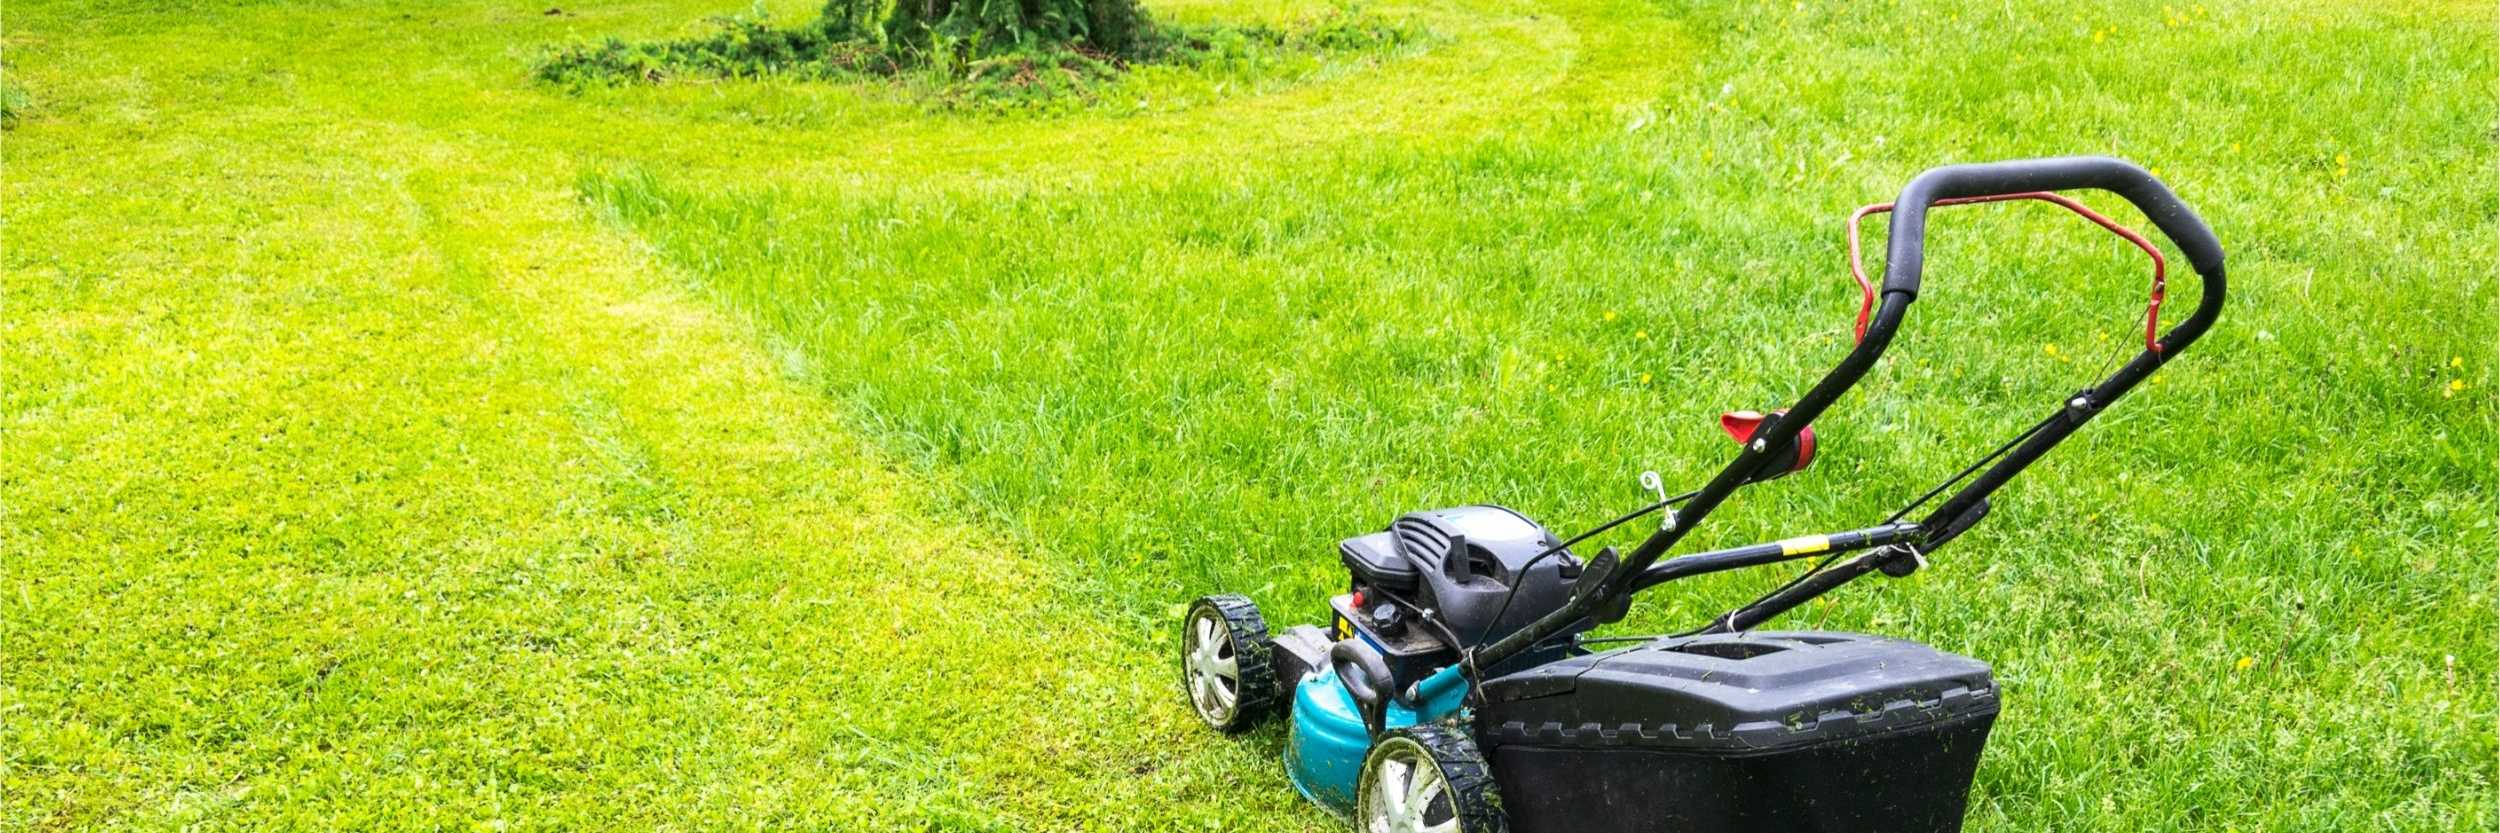 Best time to buy a lawn mower